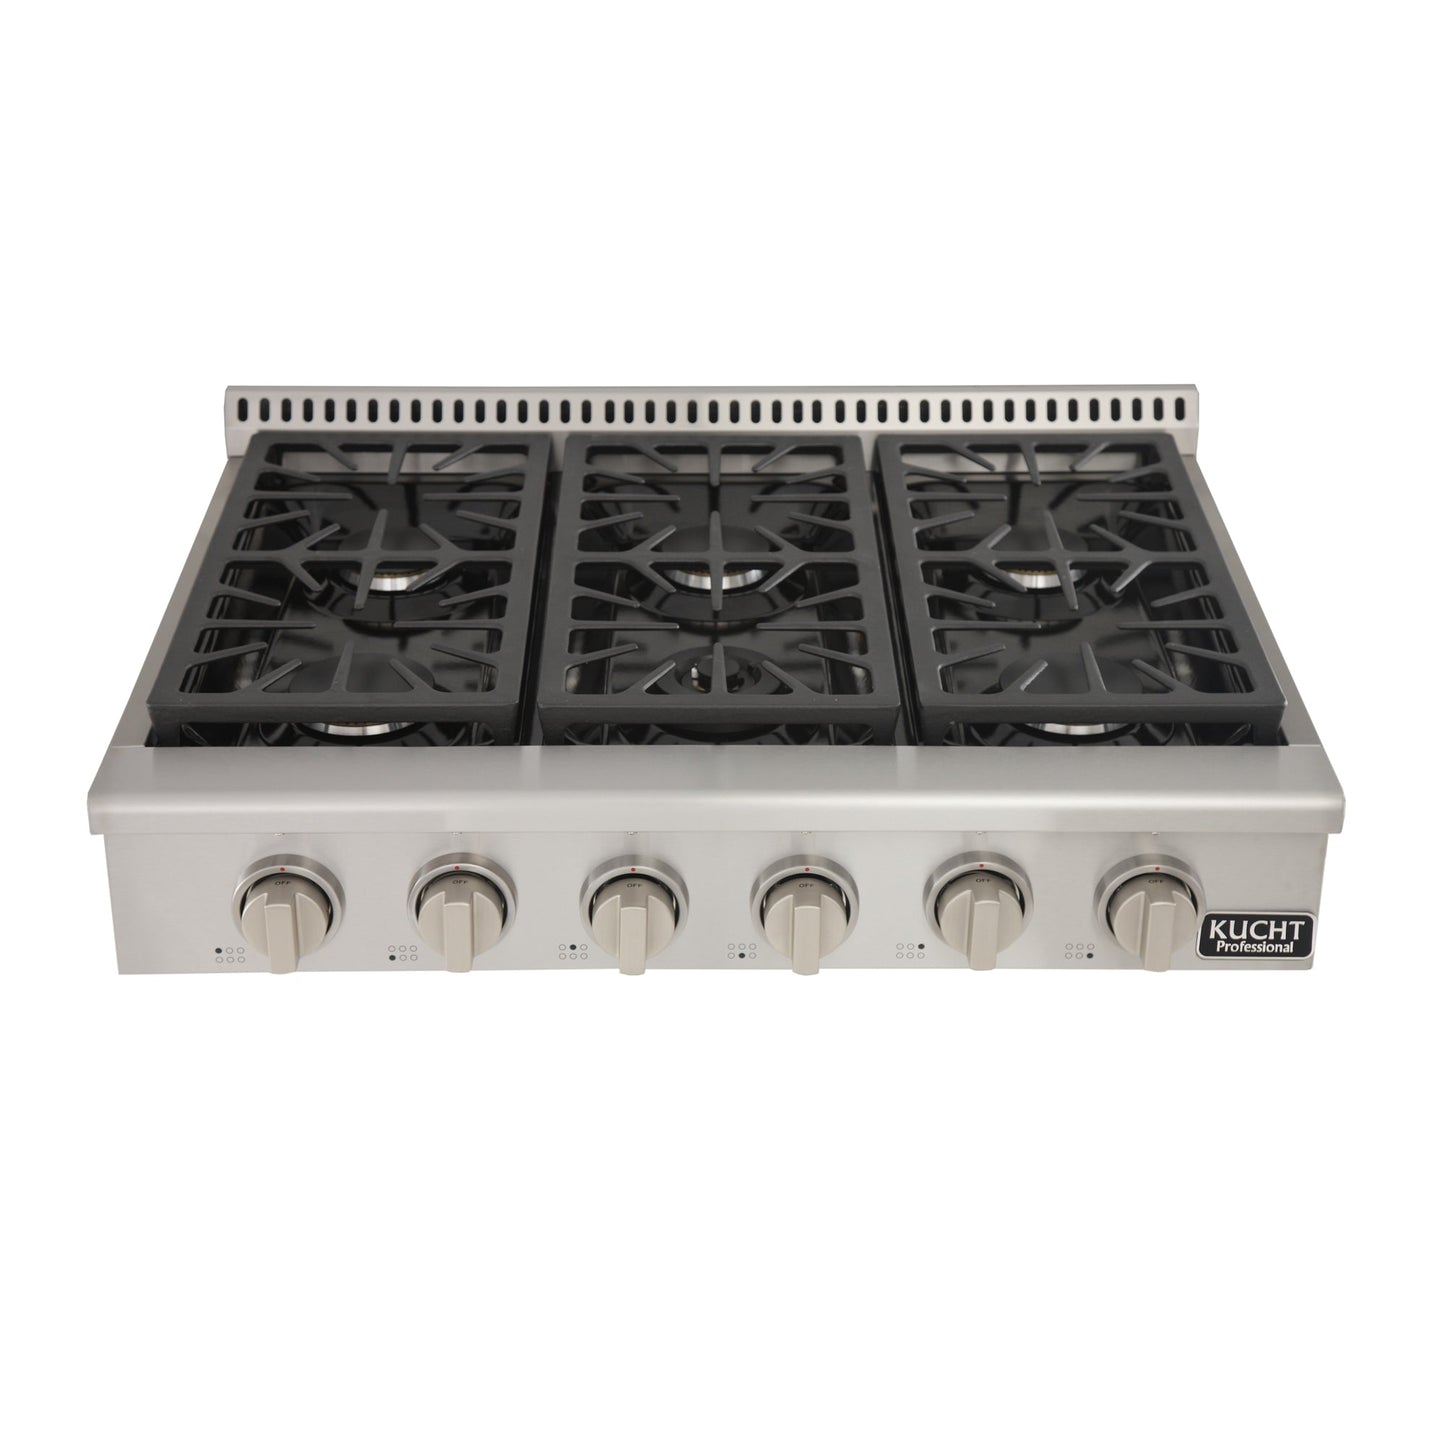 Kucht KRT Series 36" Propane Gas Range-Top With 6 Burners and Classic Silver Knobs